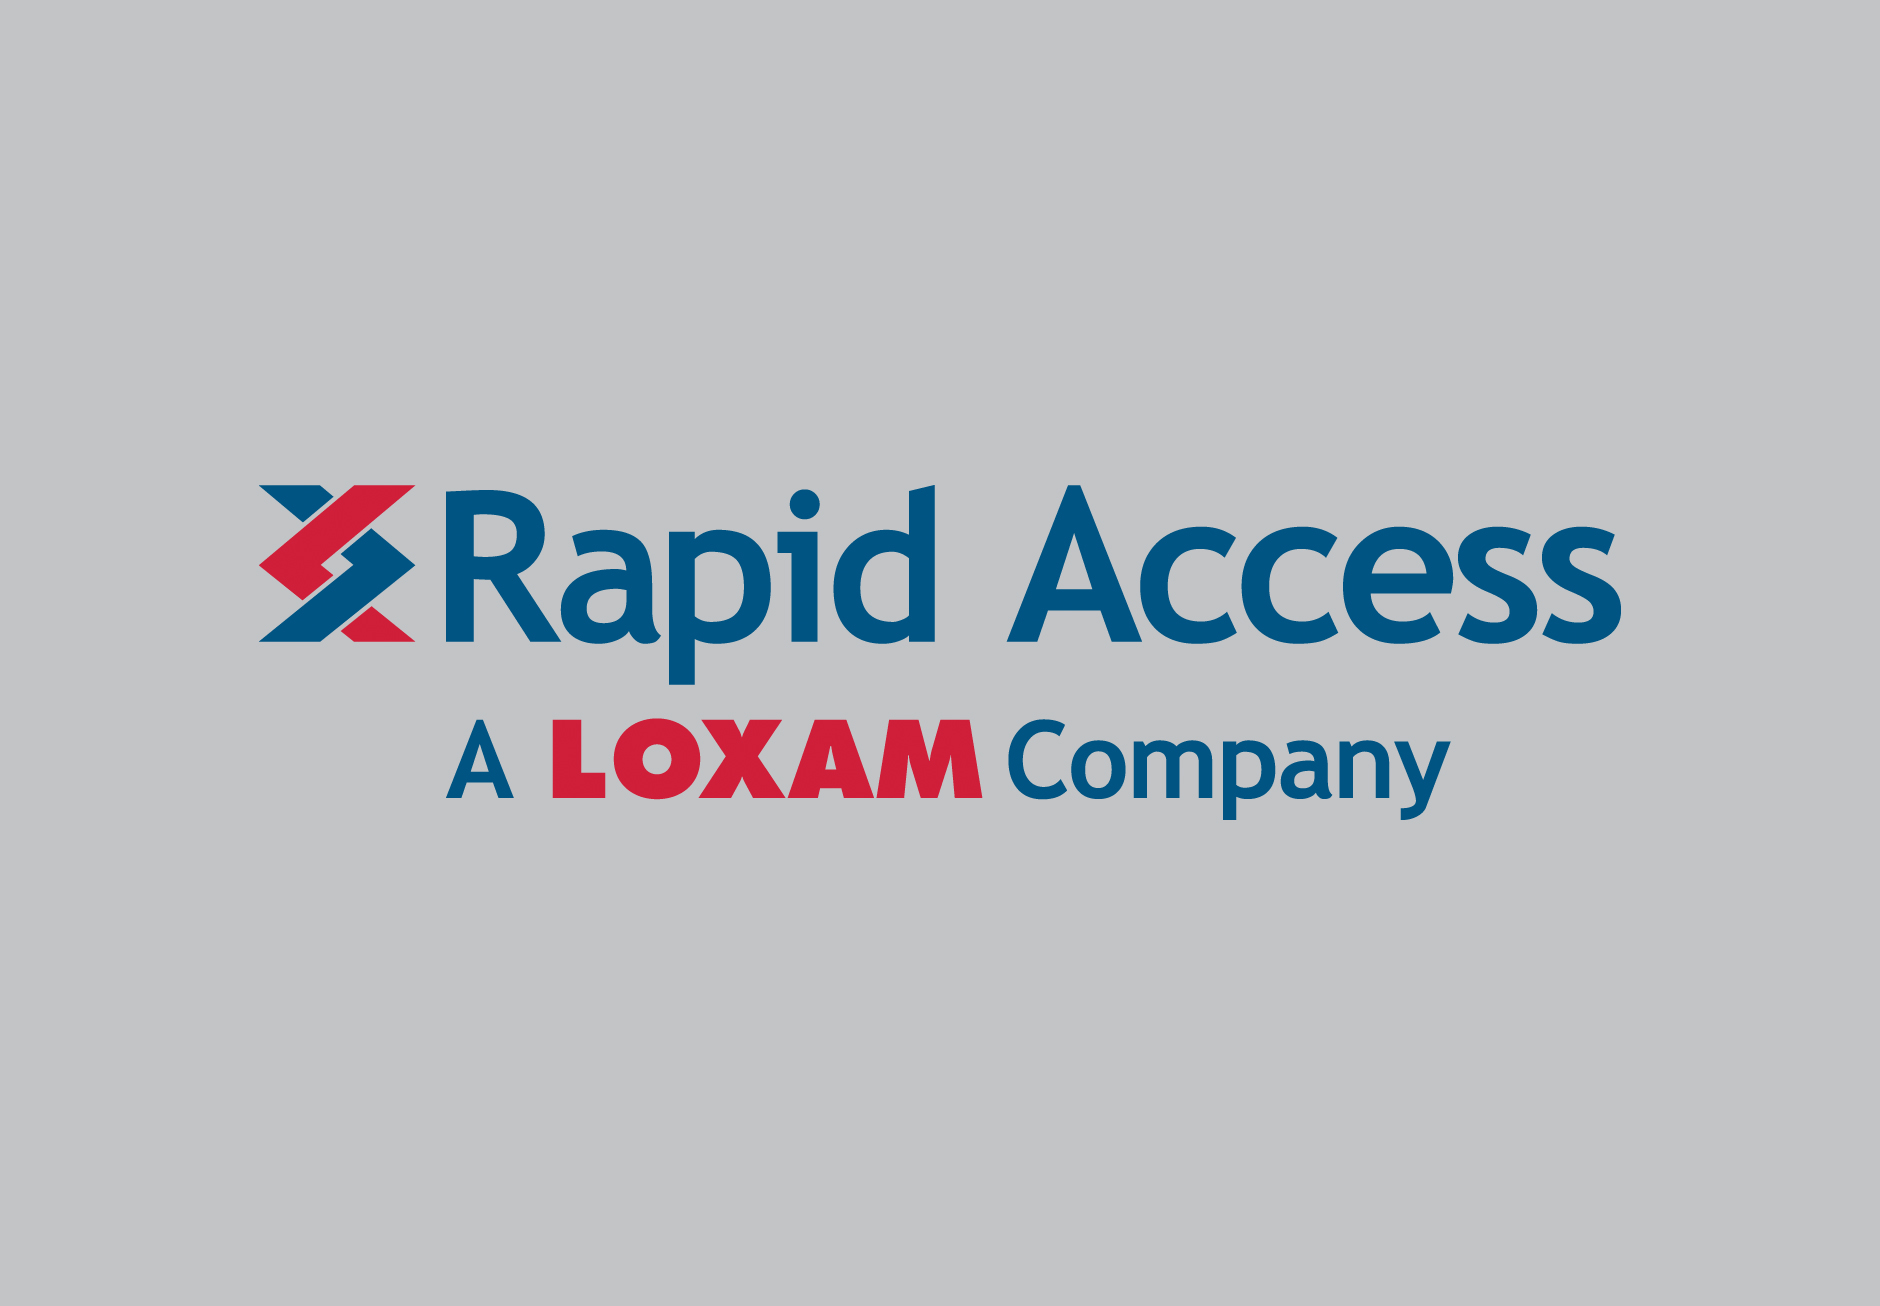 View job opportunities at Rapid Access